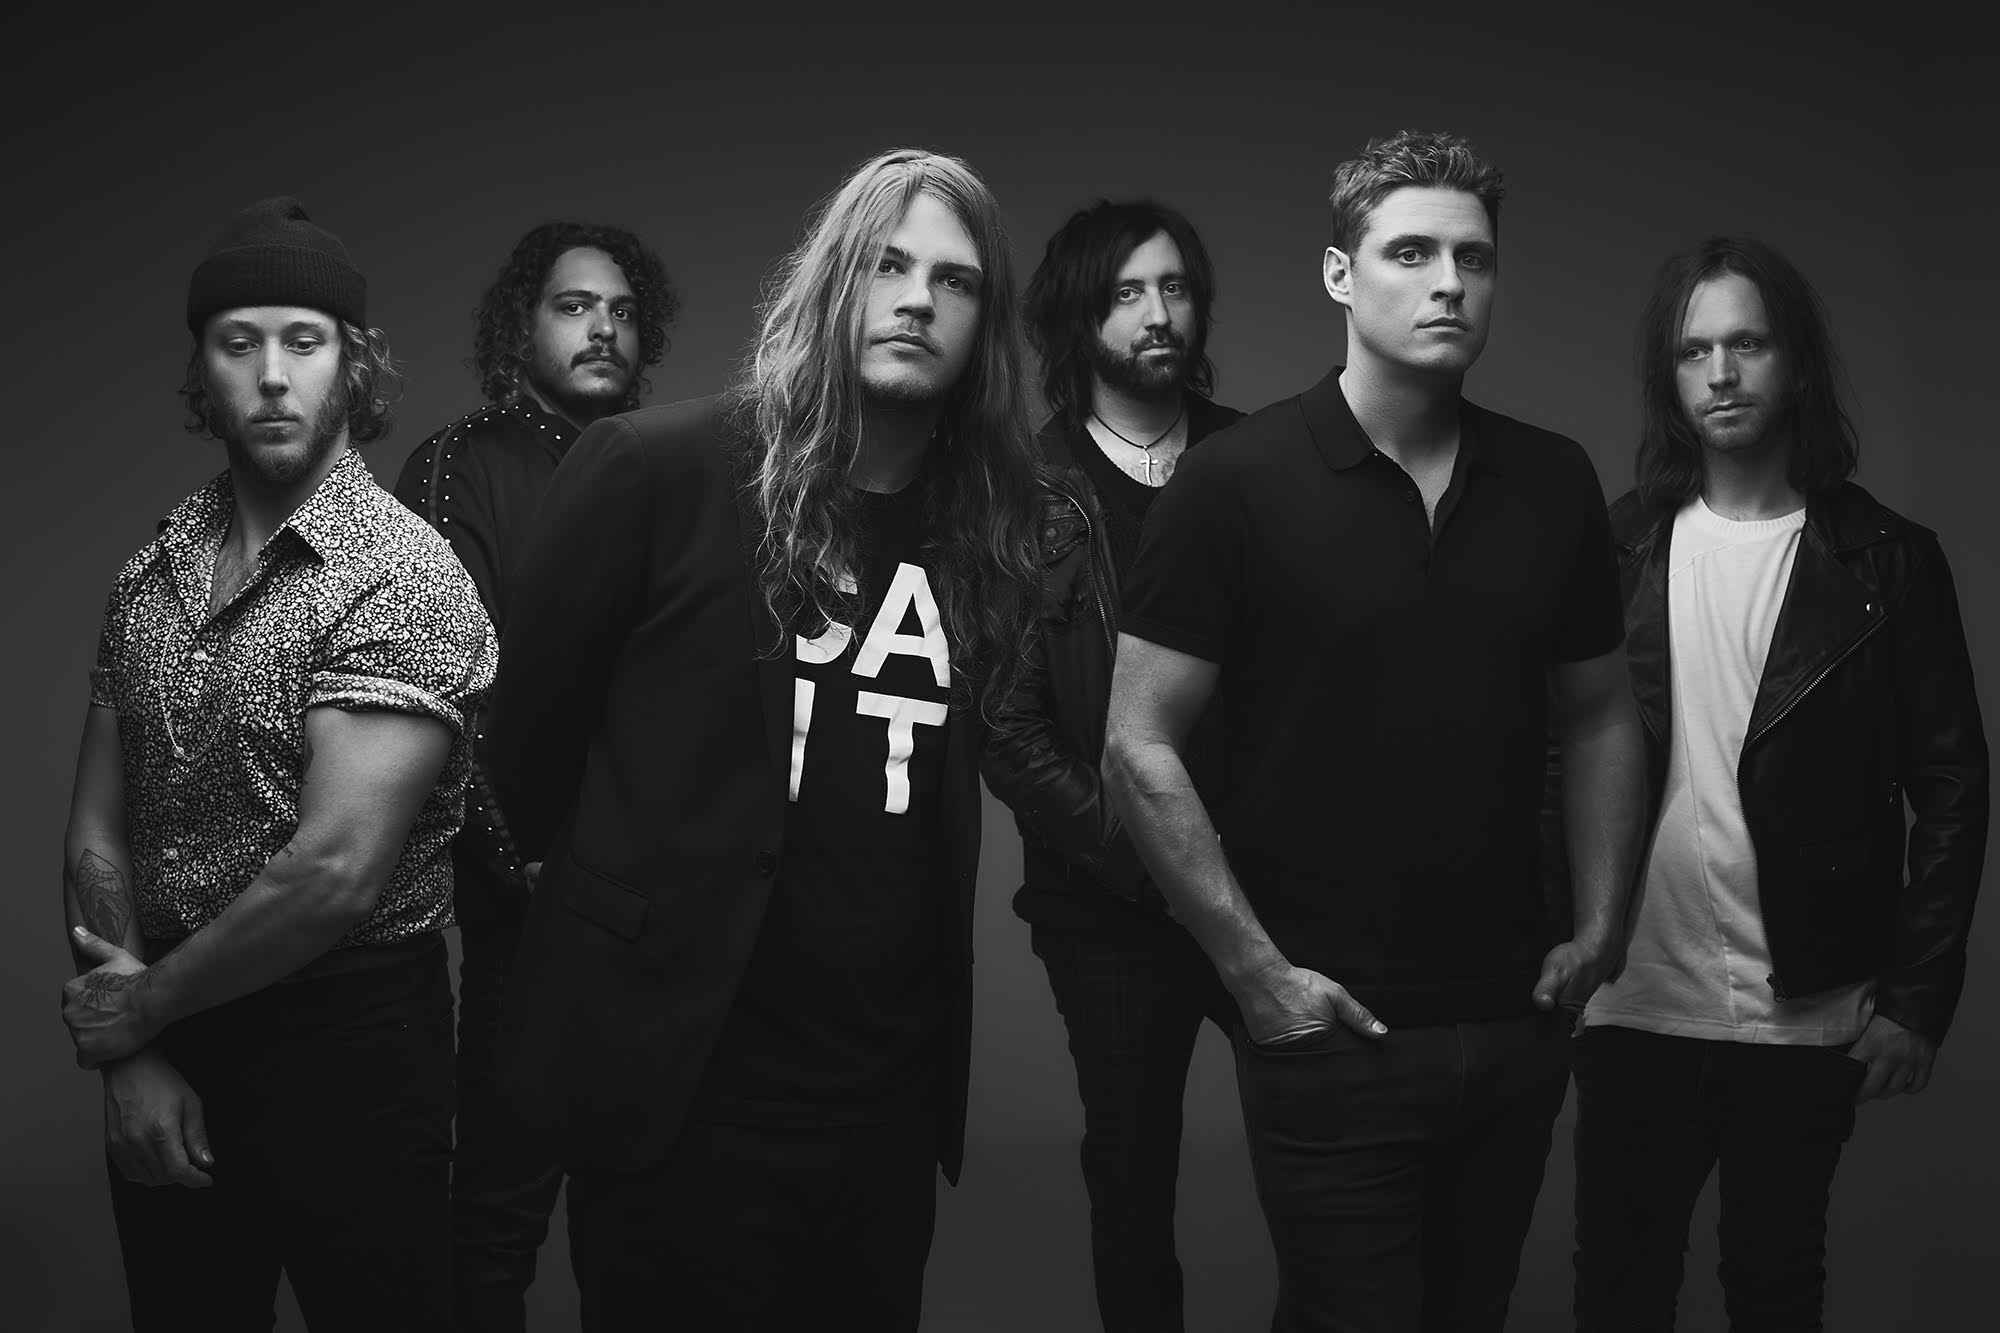 The Glorious Sons